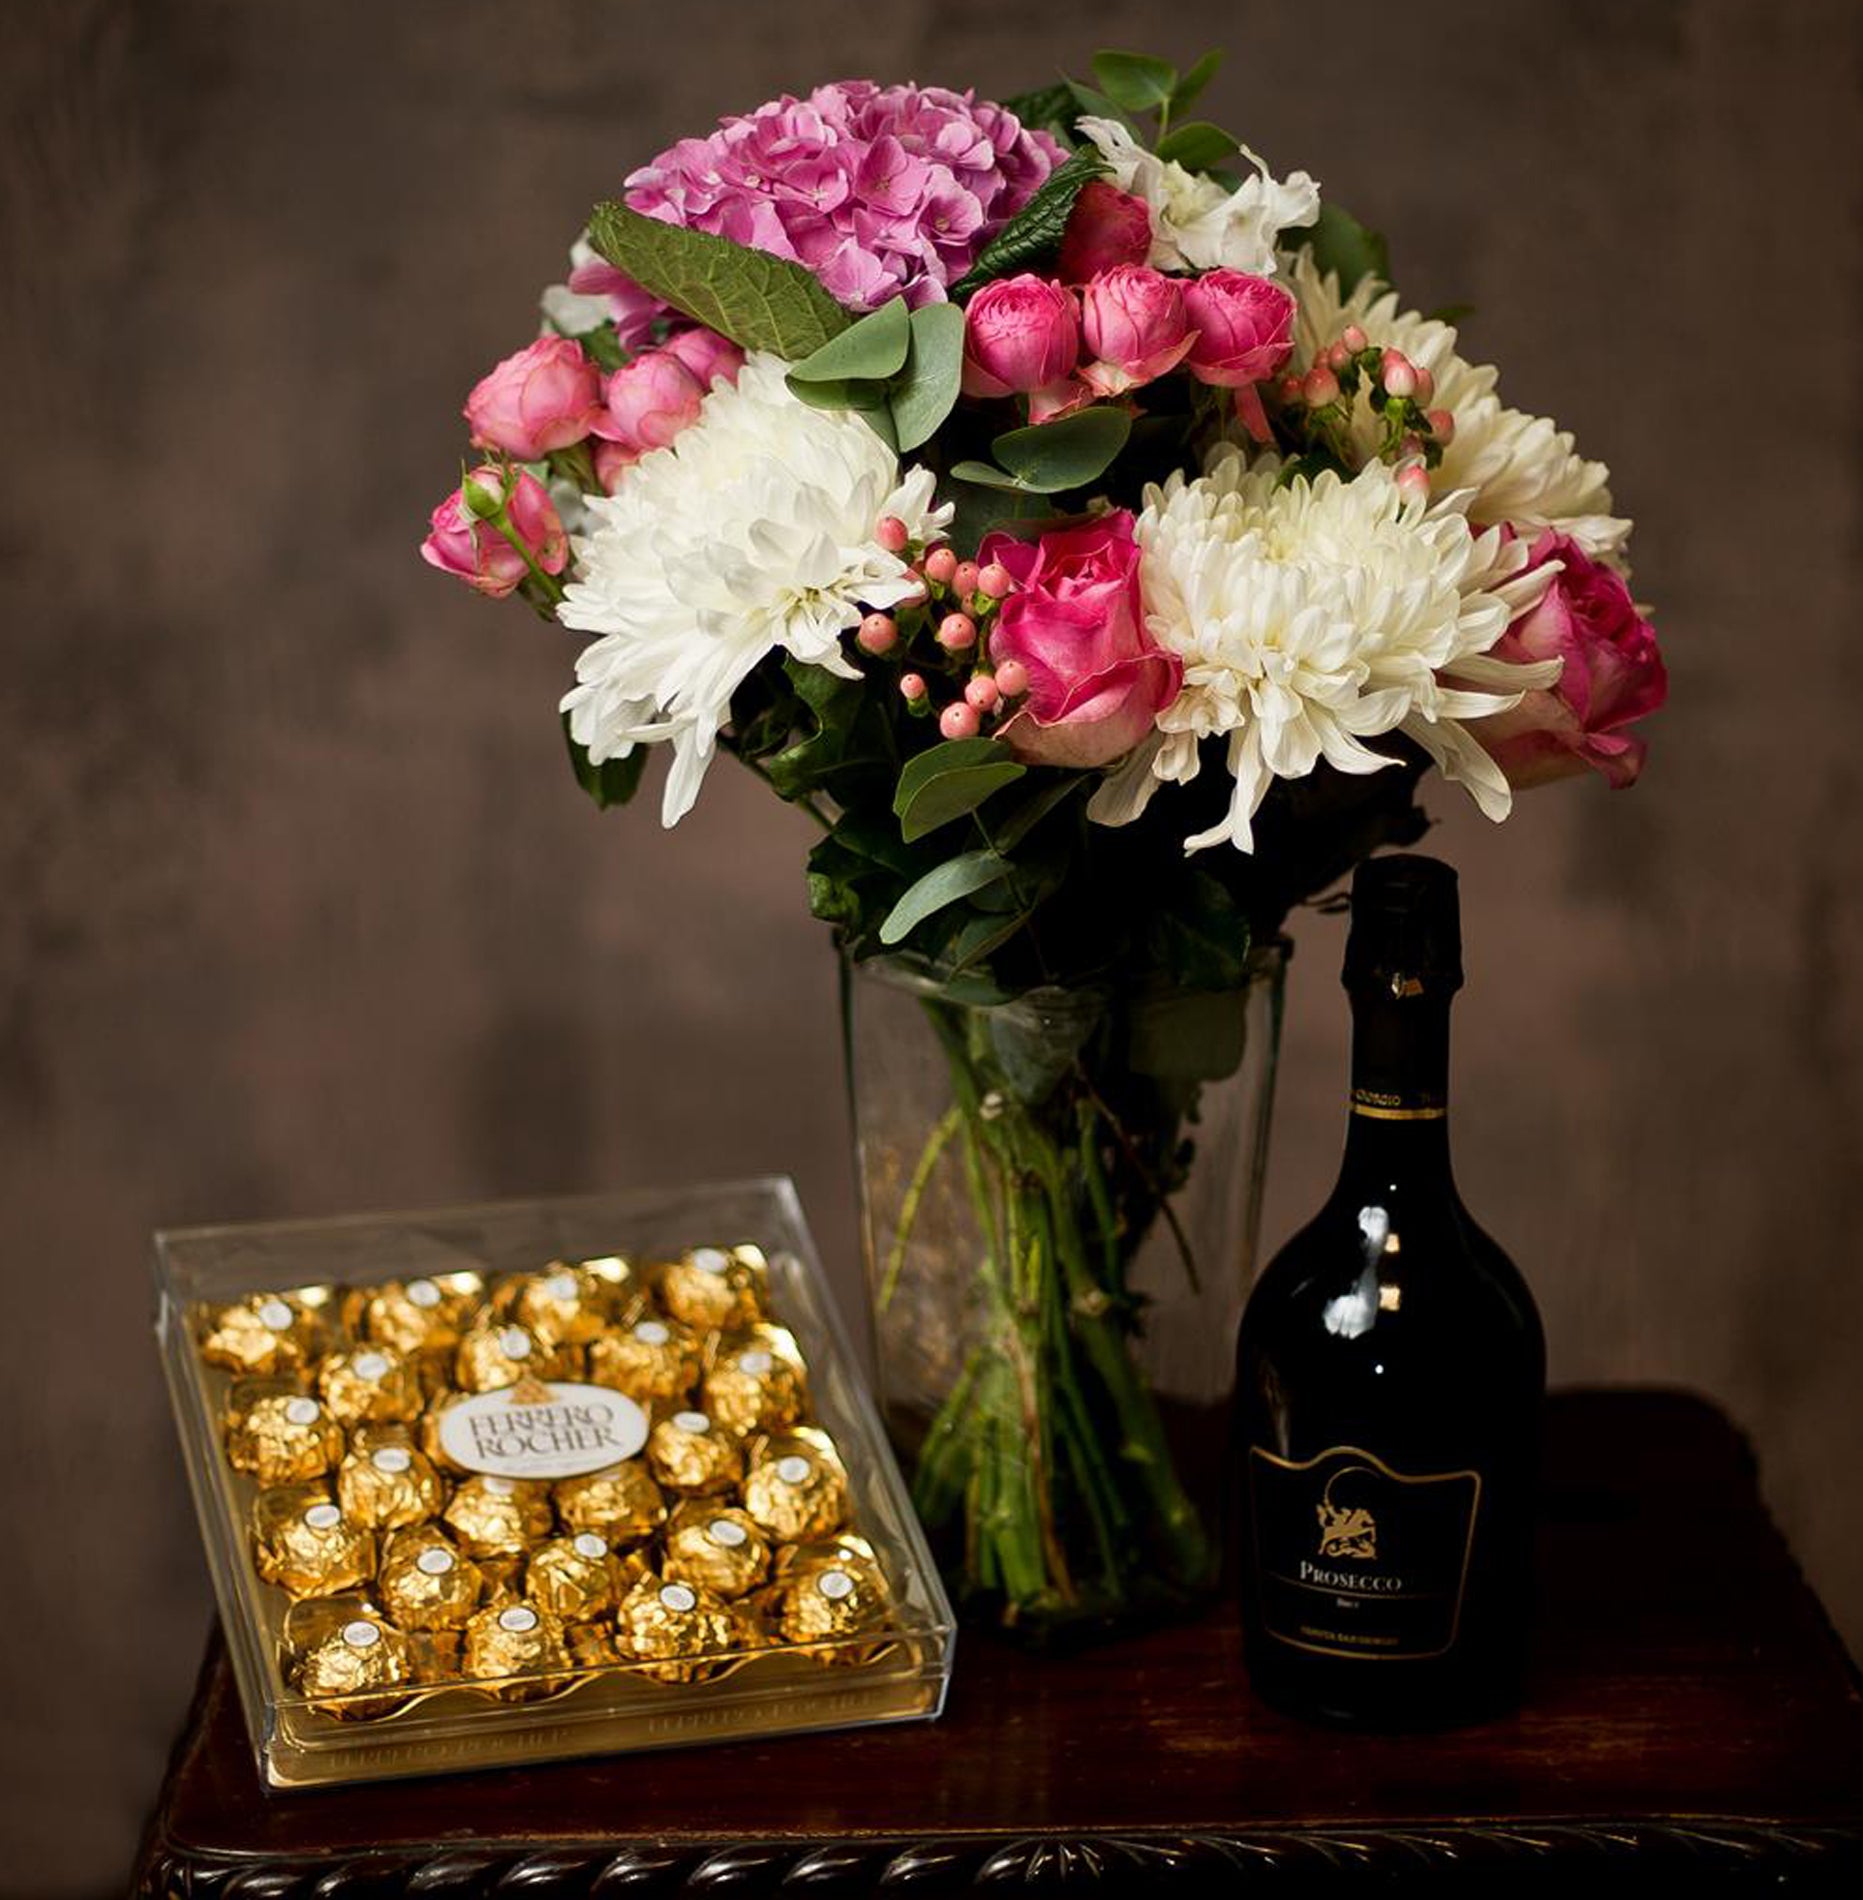 Sweet Thoughts Chocolates and Wine - Sophy Crown Flowers